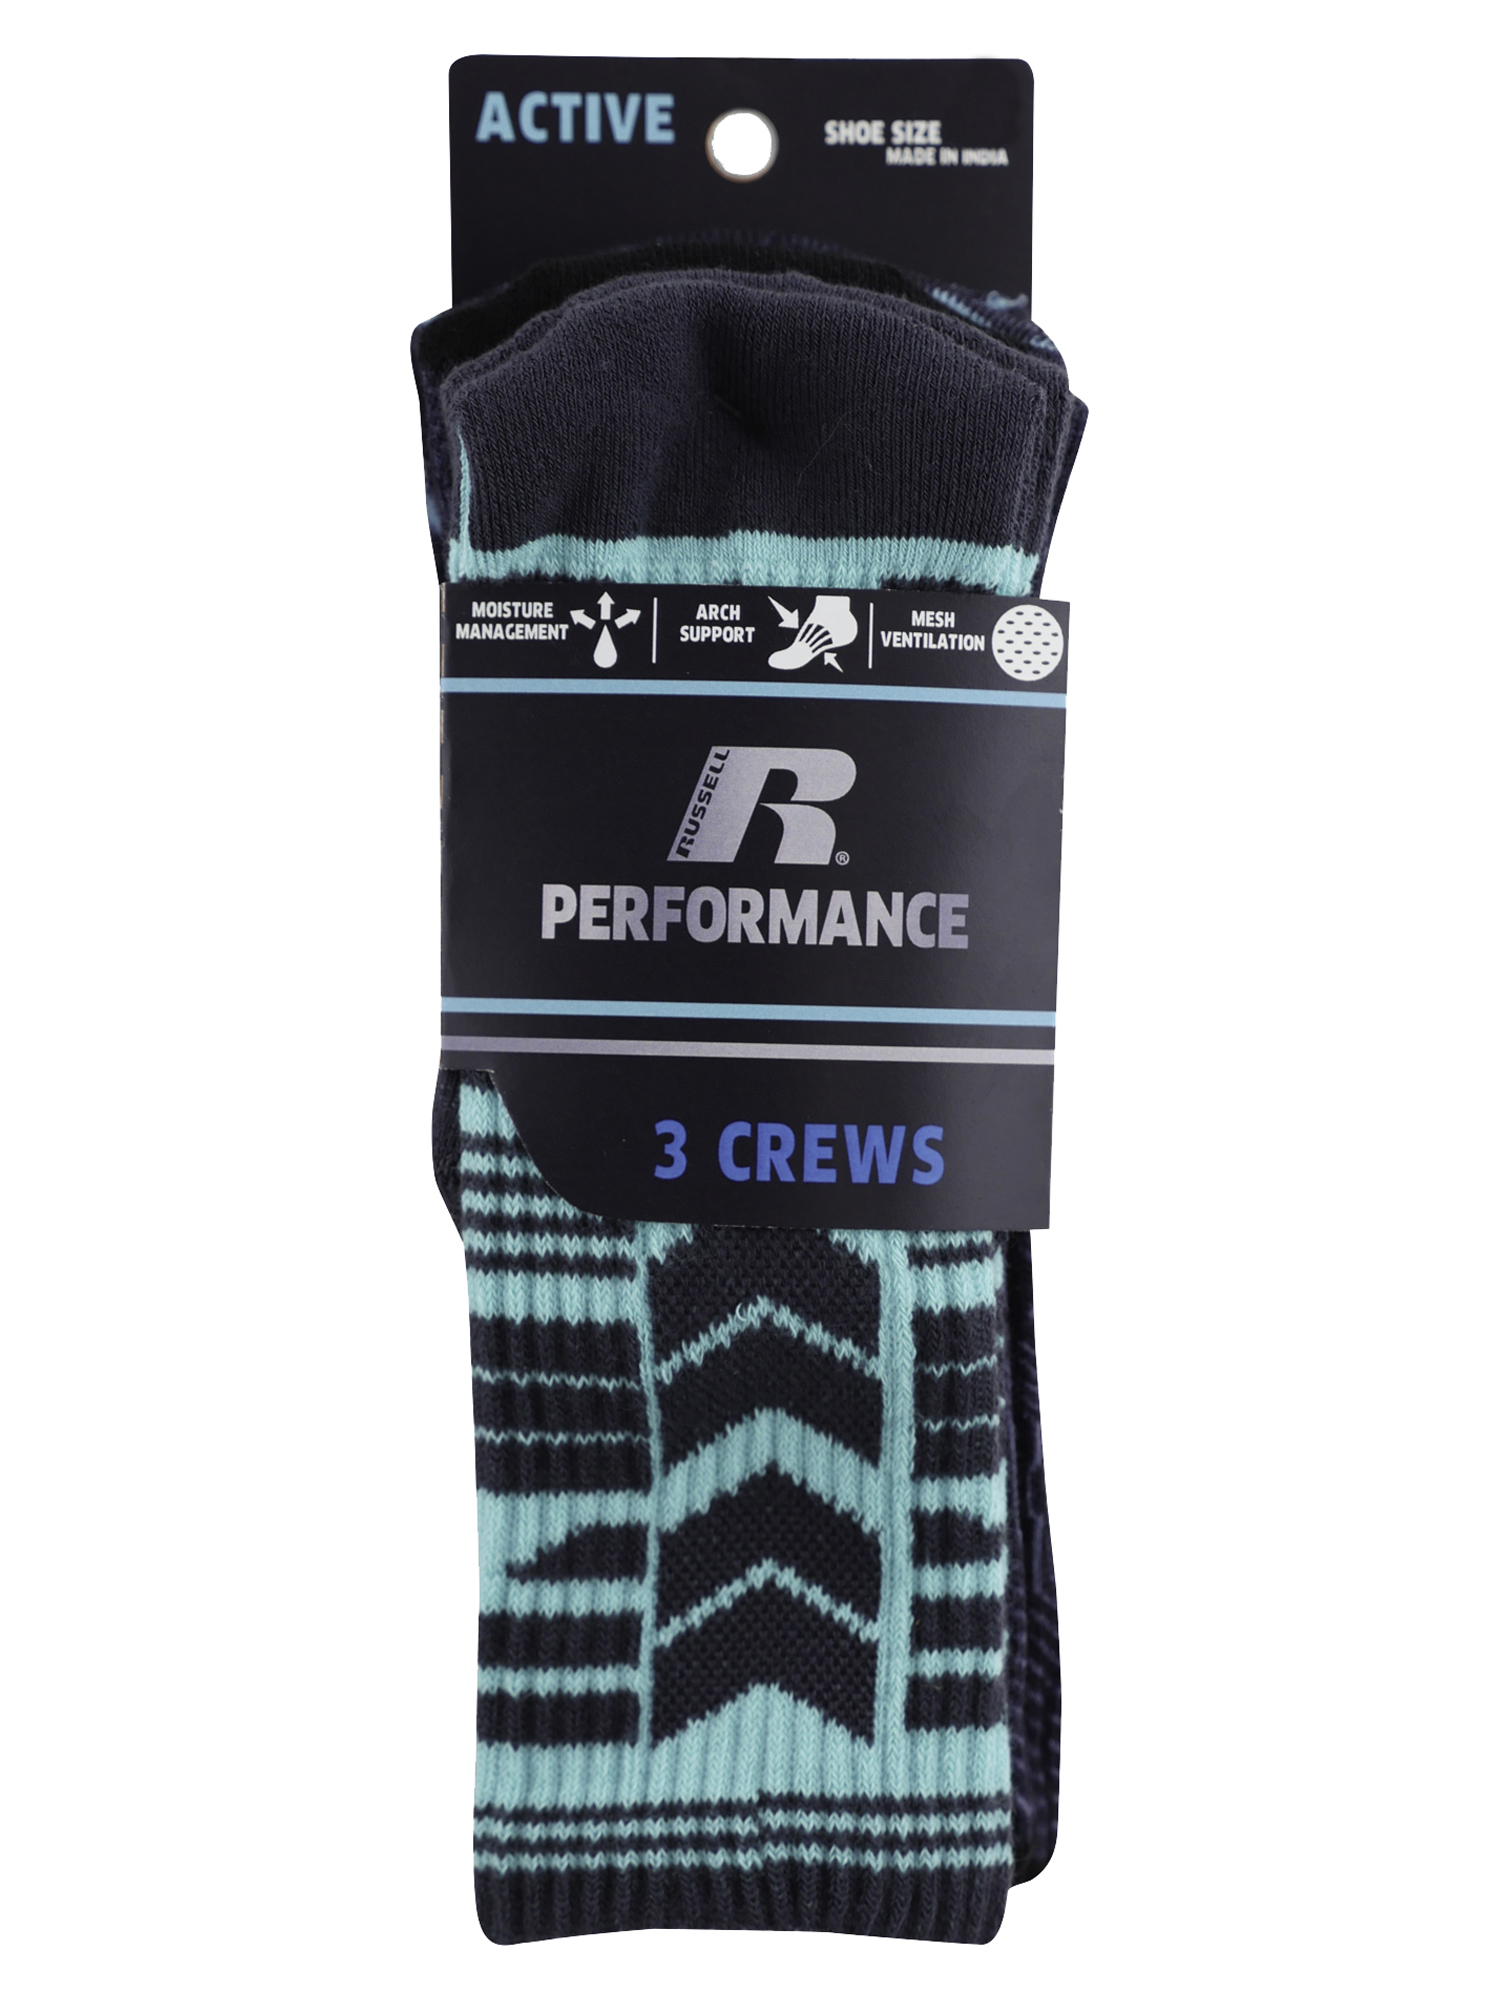 Russell Boys Striped Crew Socks, 3 Pack - image 4 of 4